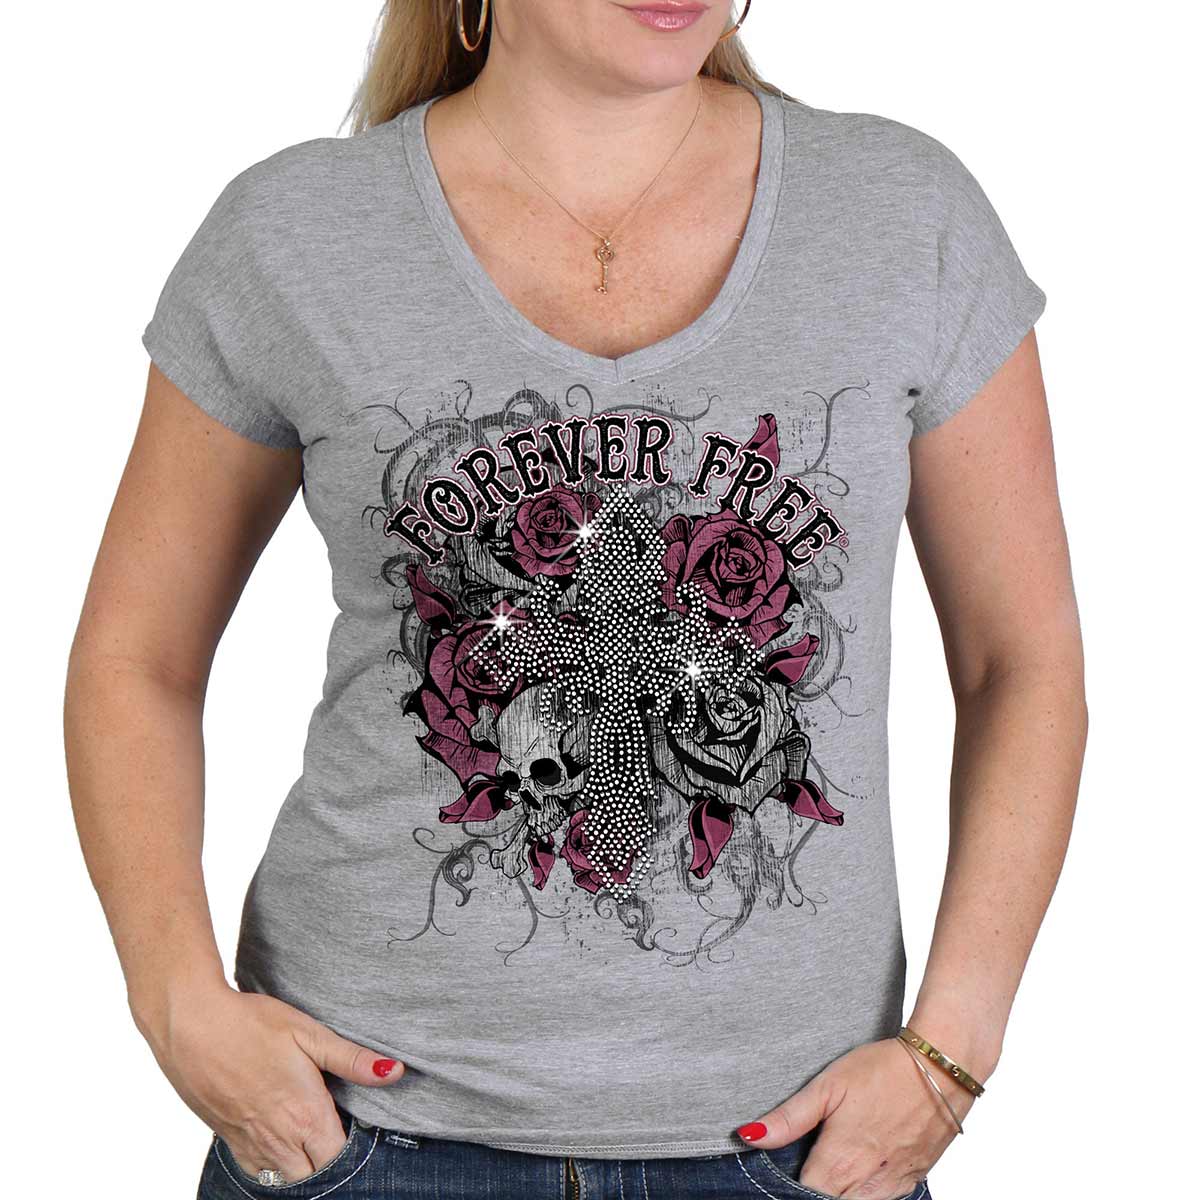 Hot Leathers GLC1557 Ladies Heather Gray Forever Free Cross Bling T Shirt